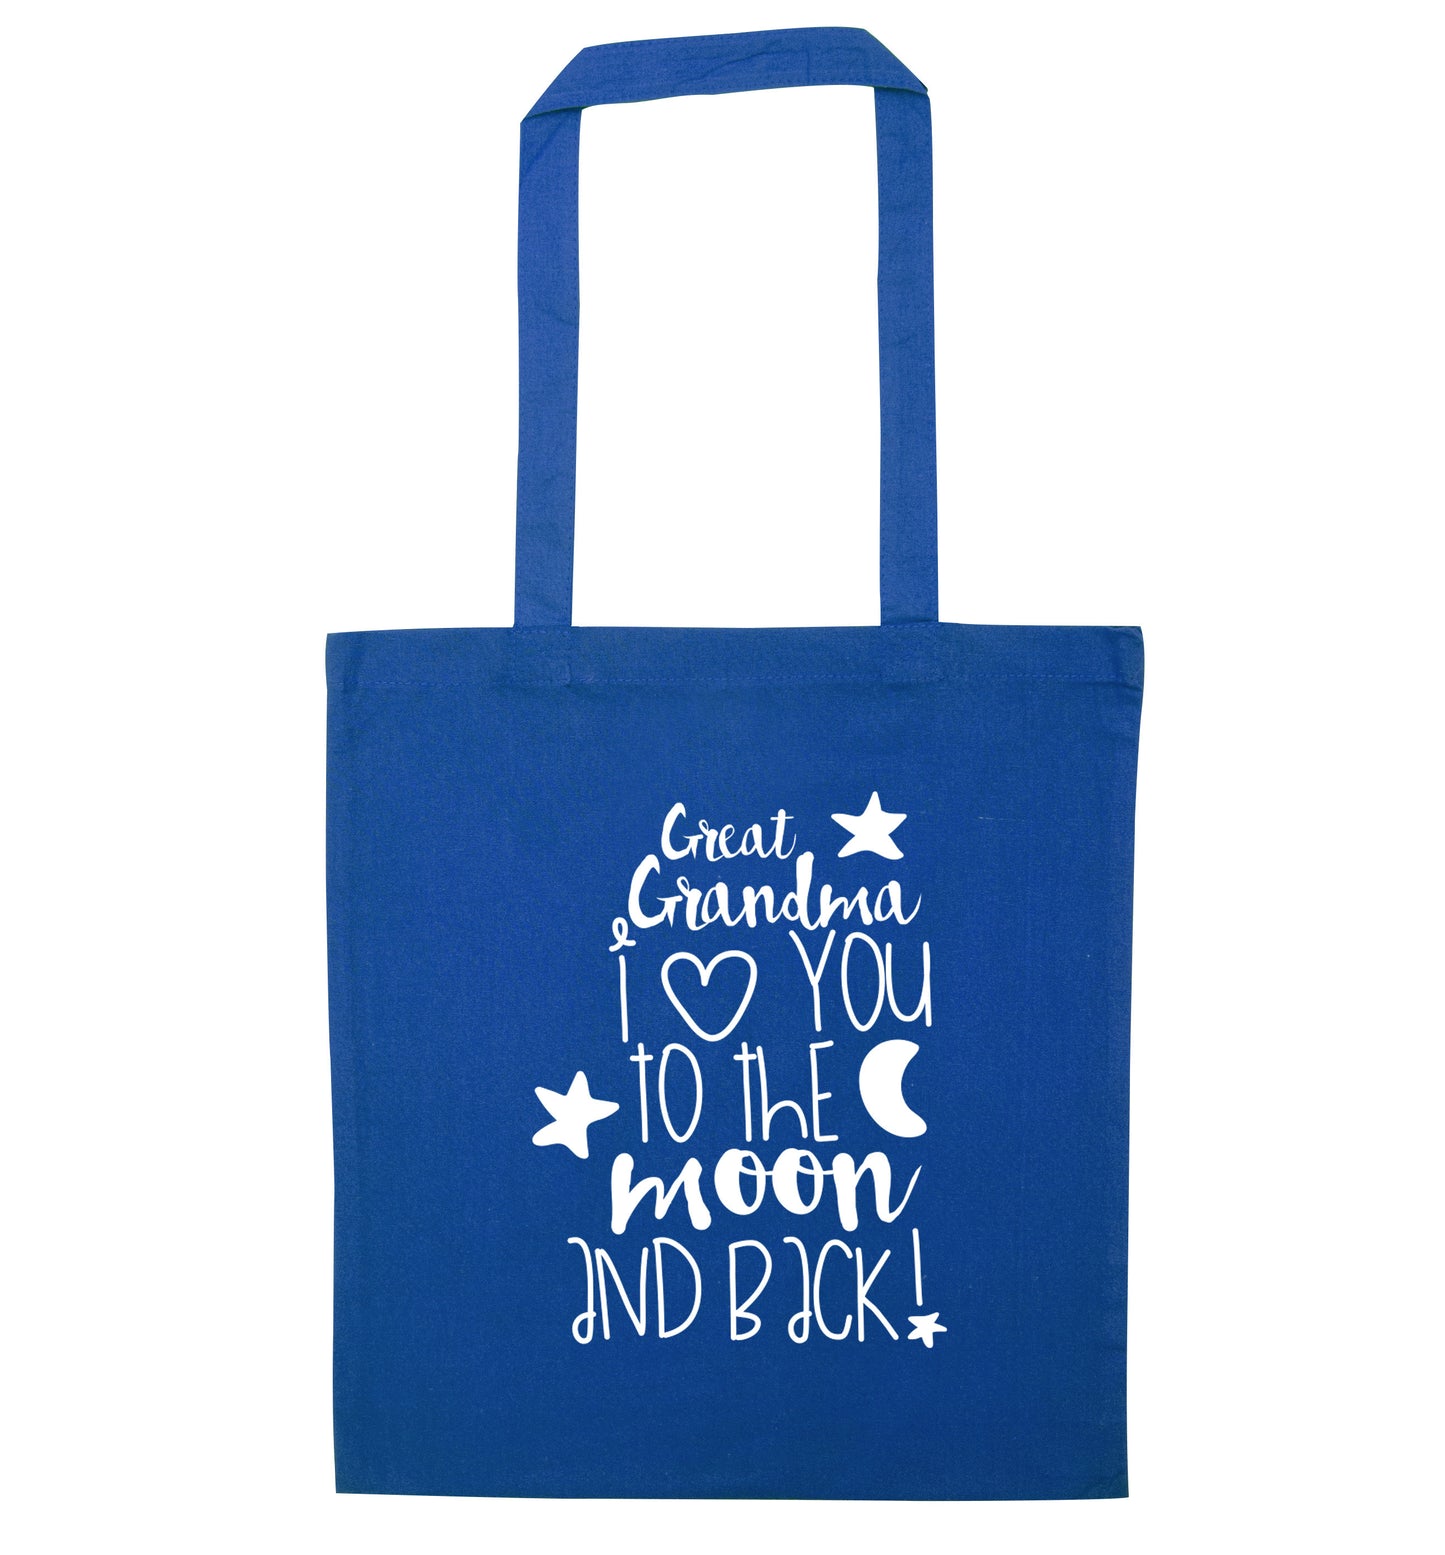 Great Grandma I love you to the moon and back blue tote bag